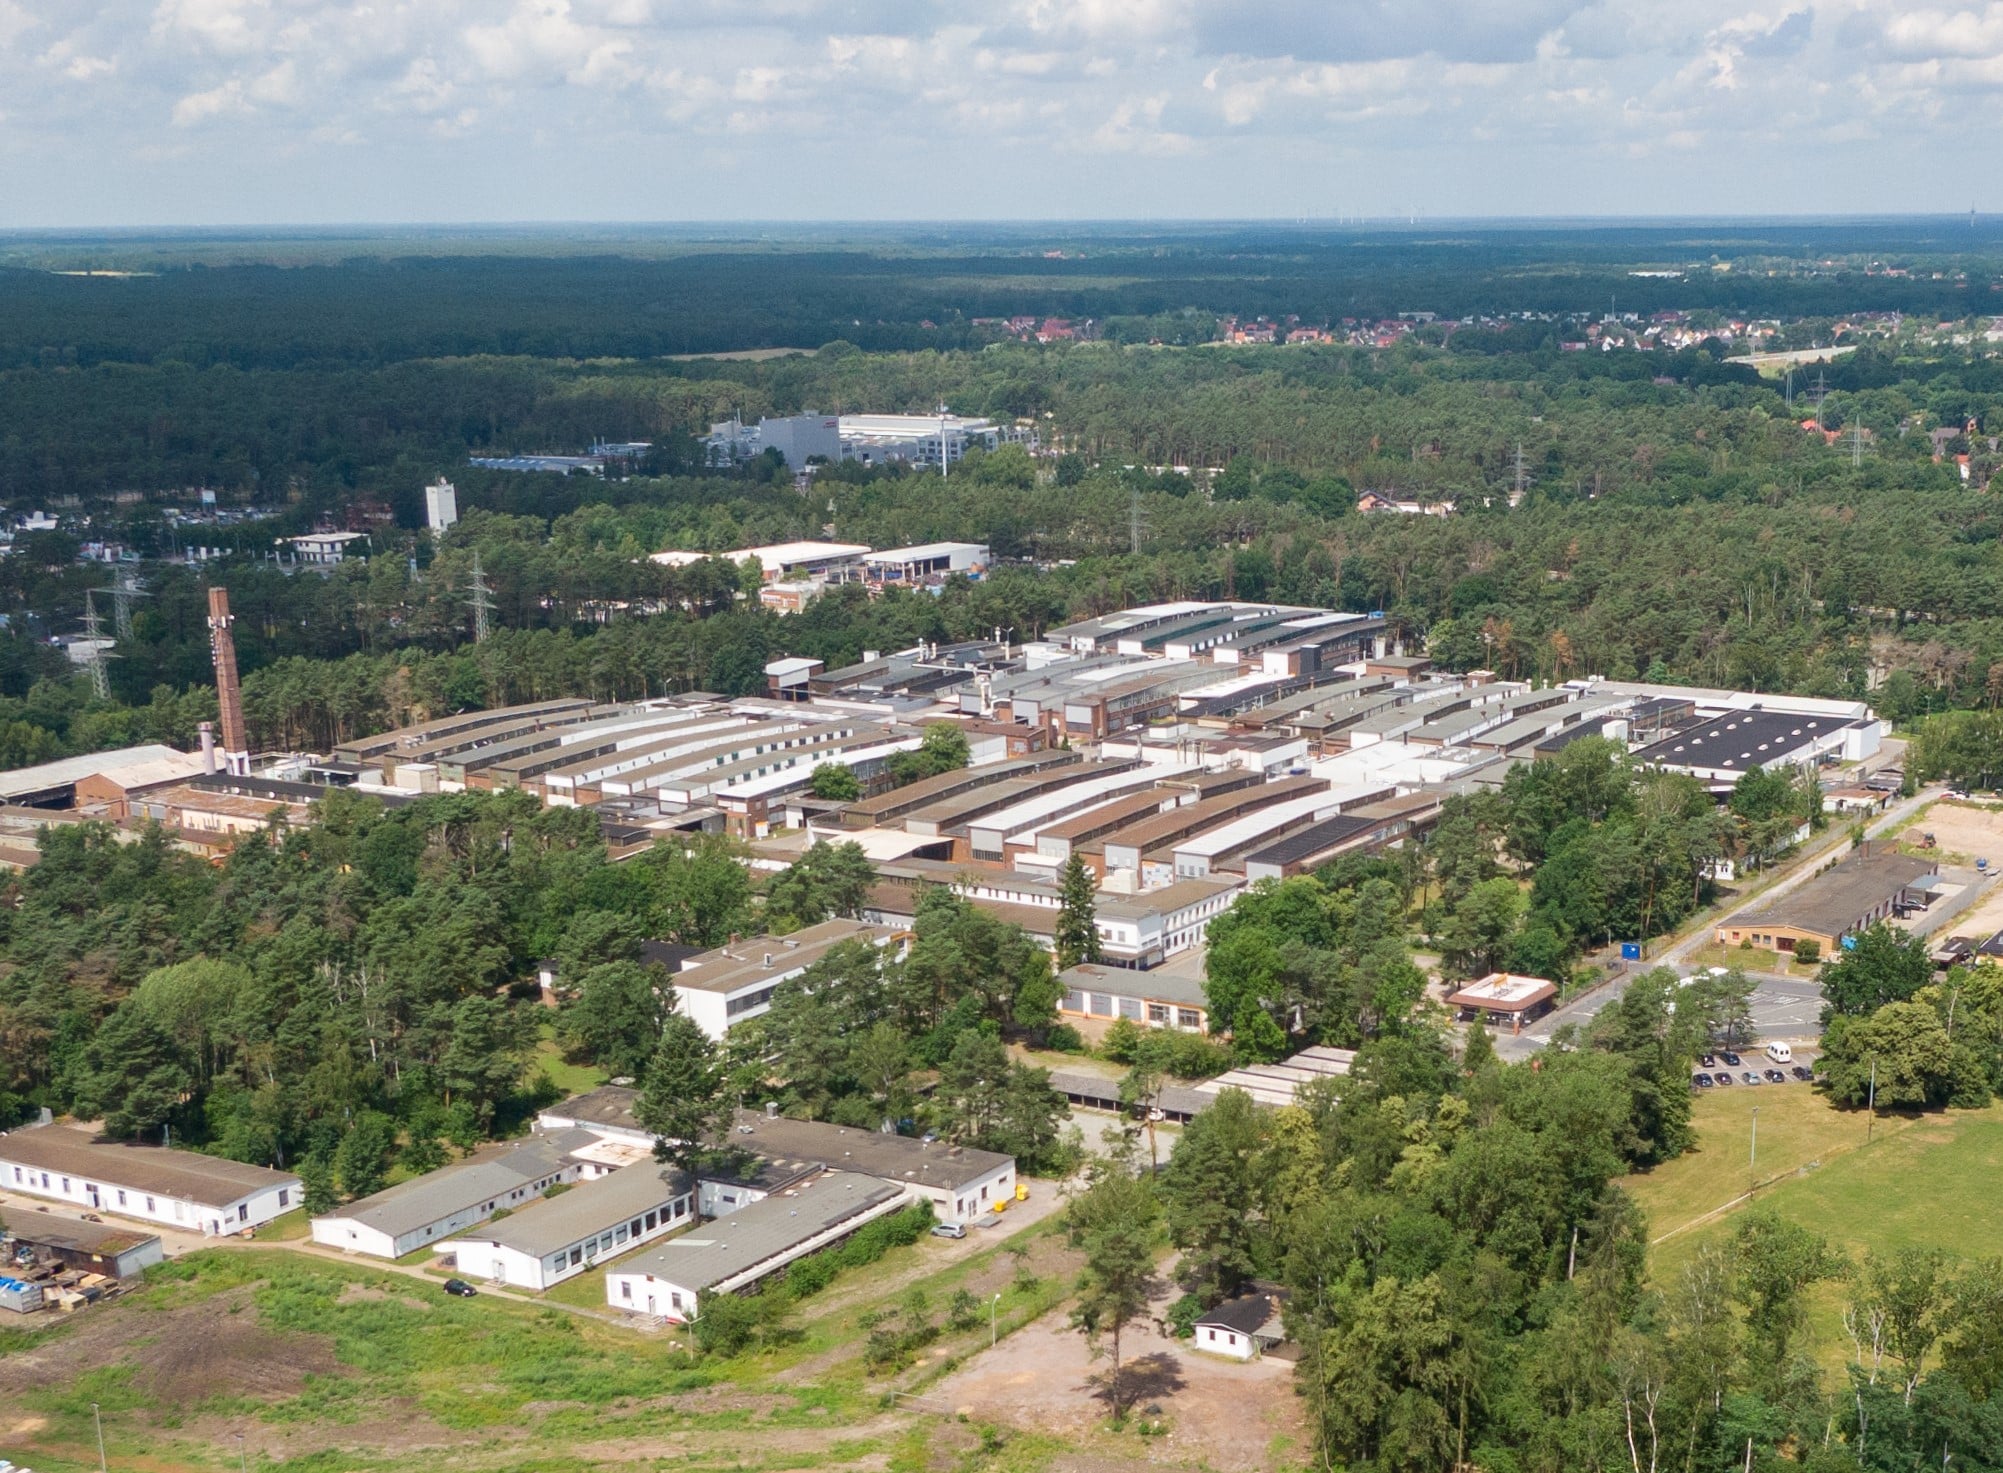 Stiebel Eltron will move into Continental's Gifhorn site